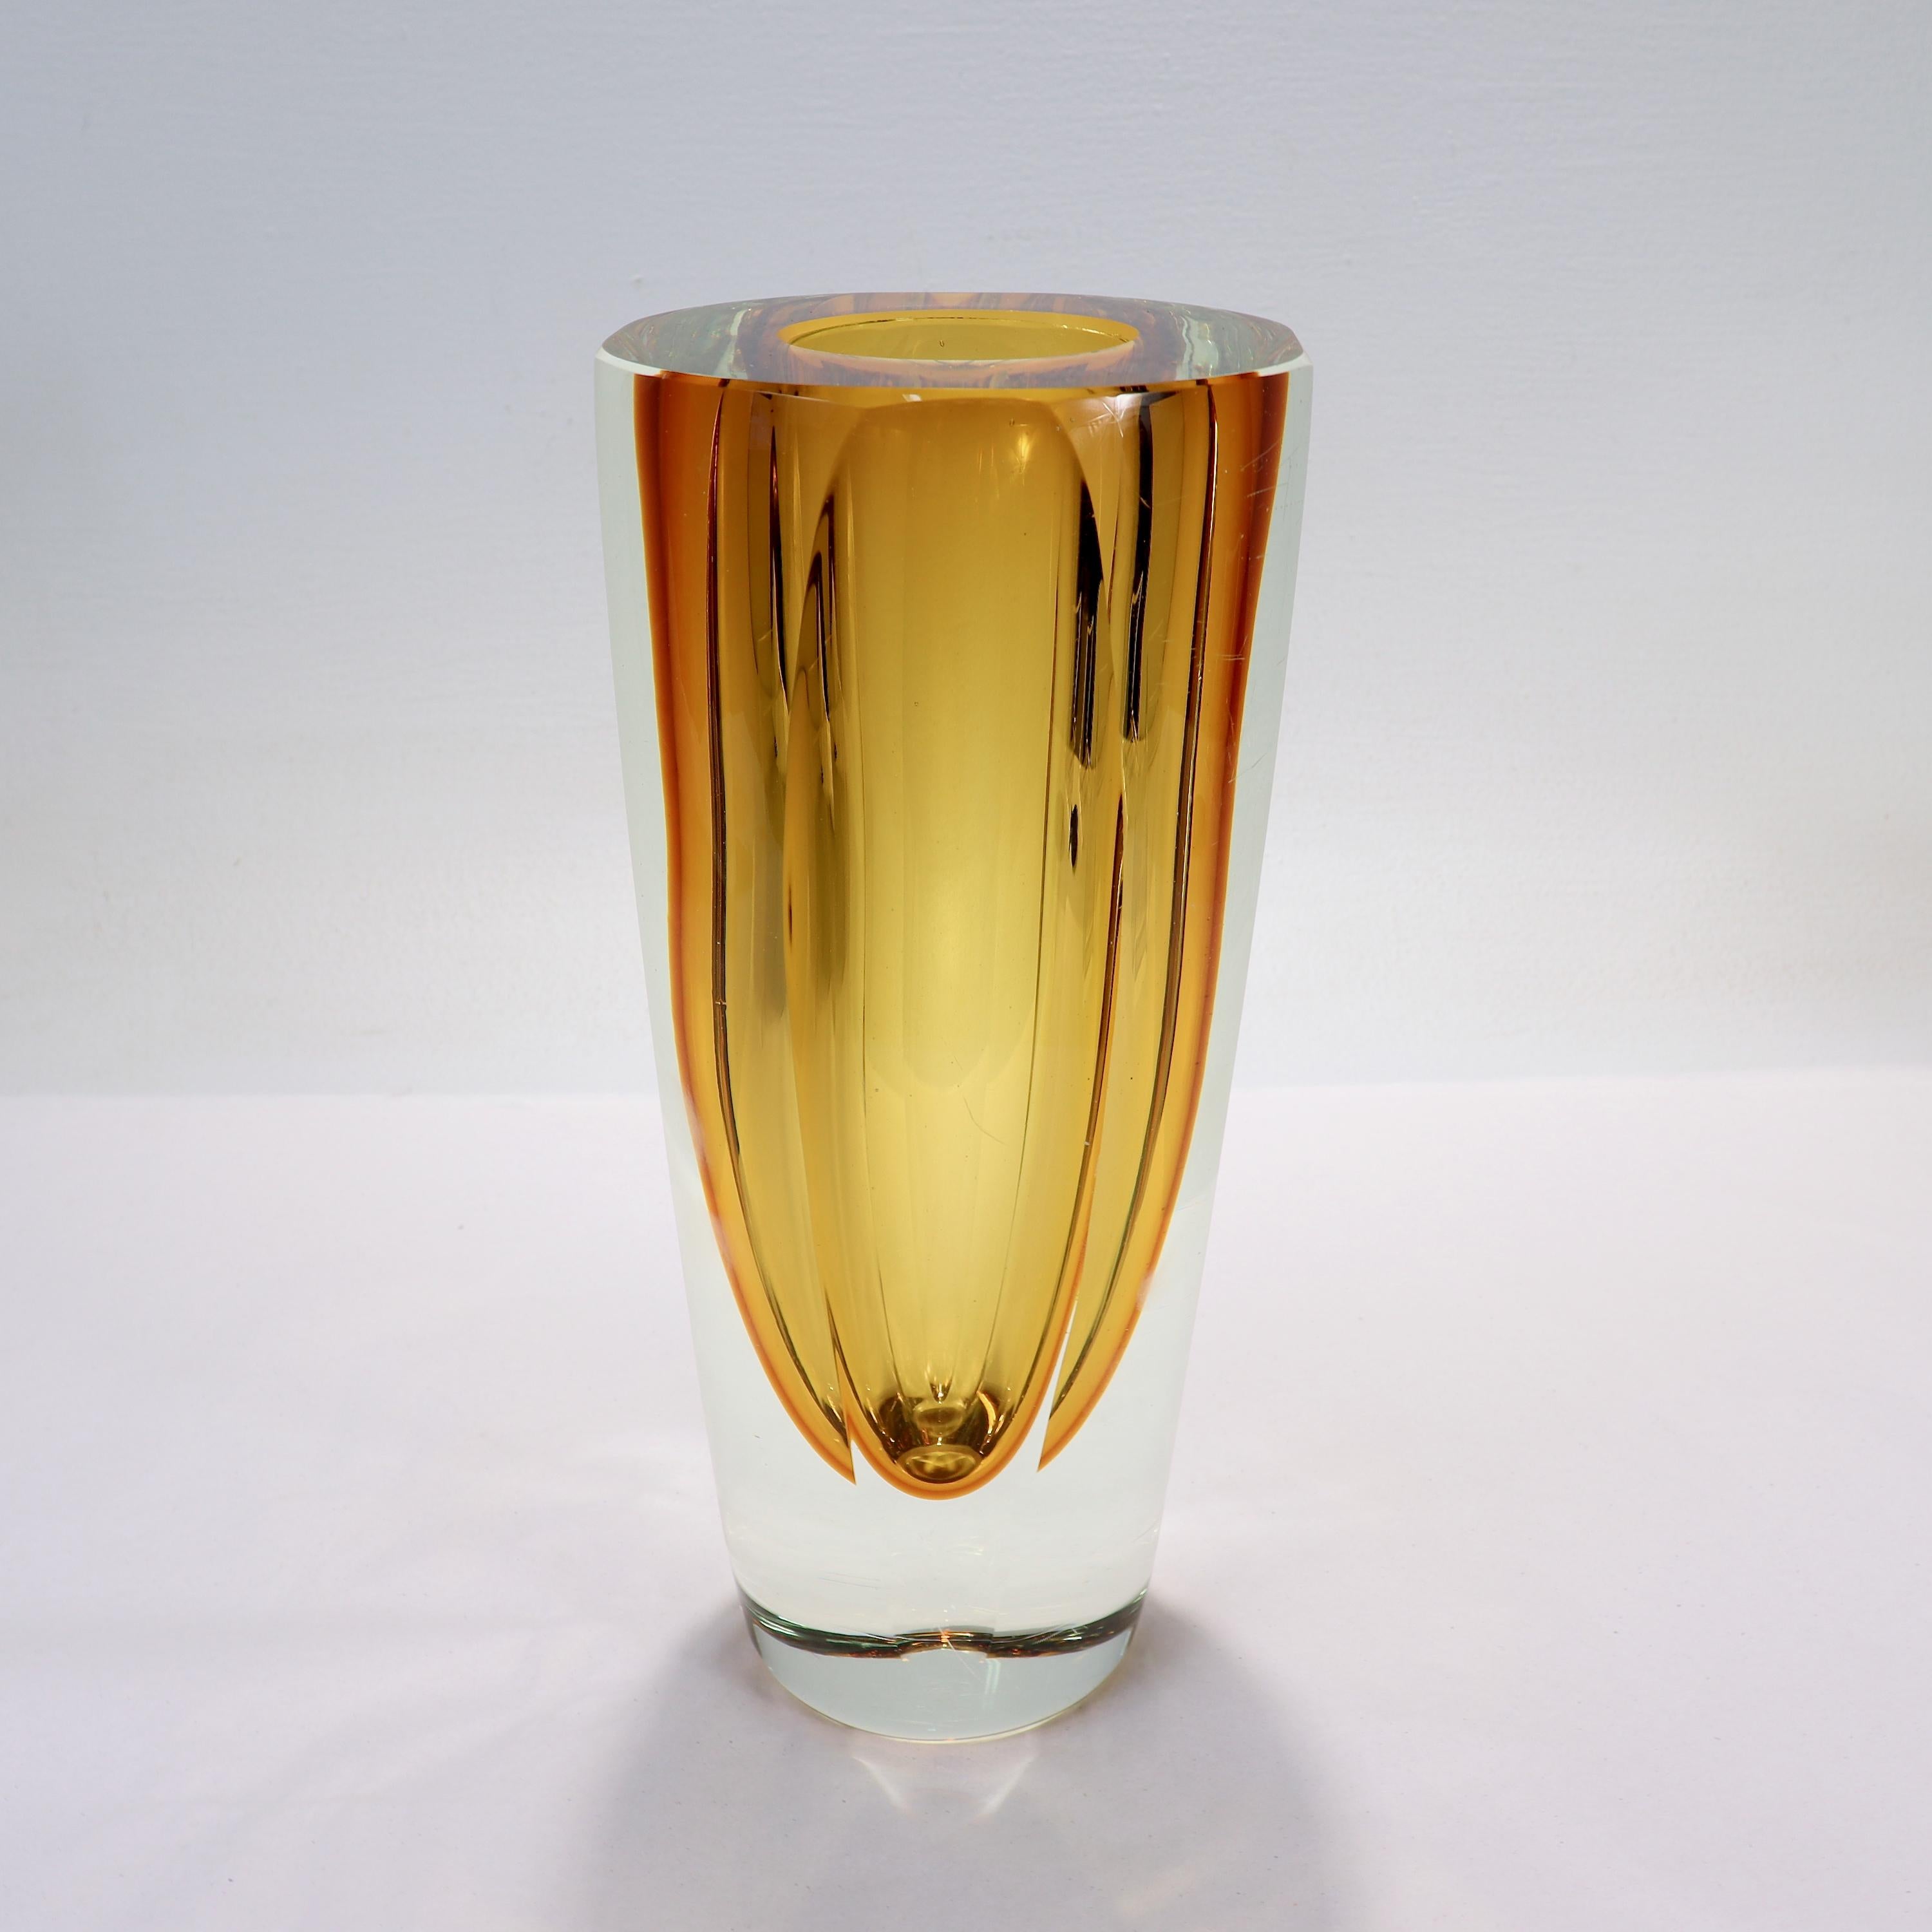 A fine Mid-Century Murano art glass vase.

Attributed to Alessandro Mandruzzato.

With a thick walled yellow sommerso technique center in a tapered and faceted clear glass body.

A wonderful Mid-Century Murano glass vase!

Date:
Mid-20th